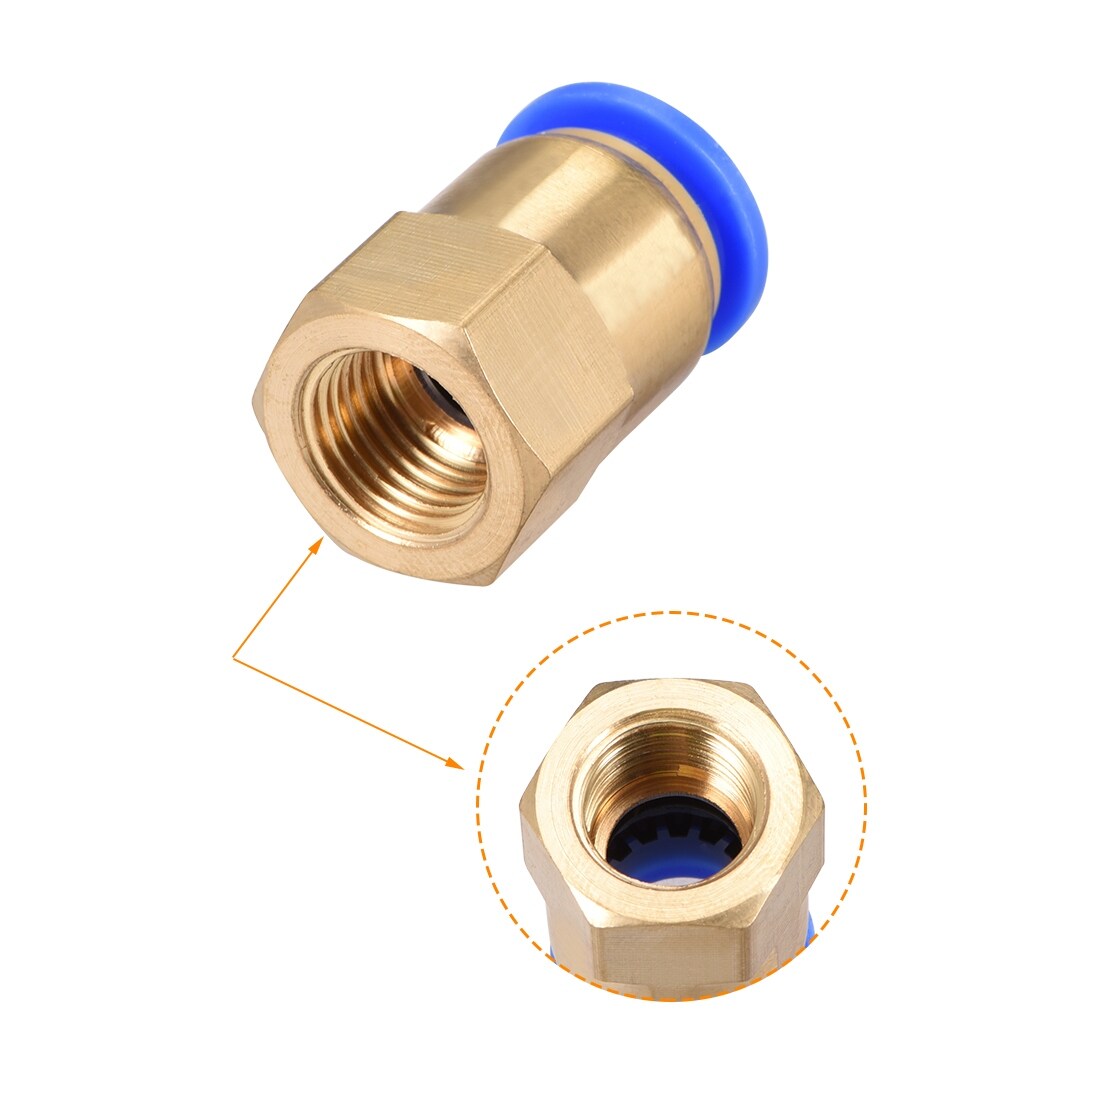 1/4" G Female Straight Thread 12mm Push In Joint Pneumatic Quick Fittings - 1/4" G x 12mm